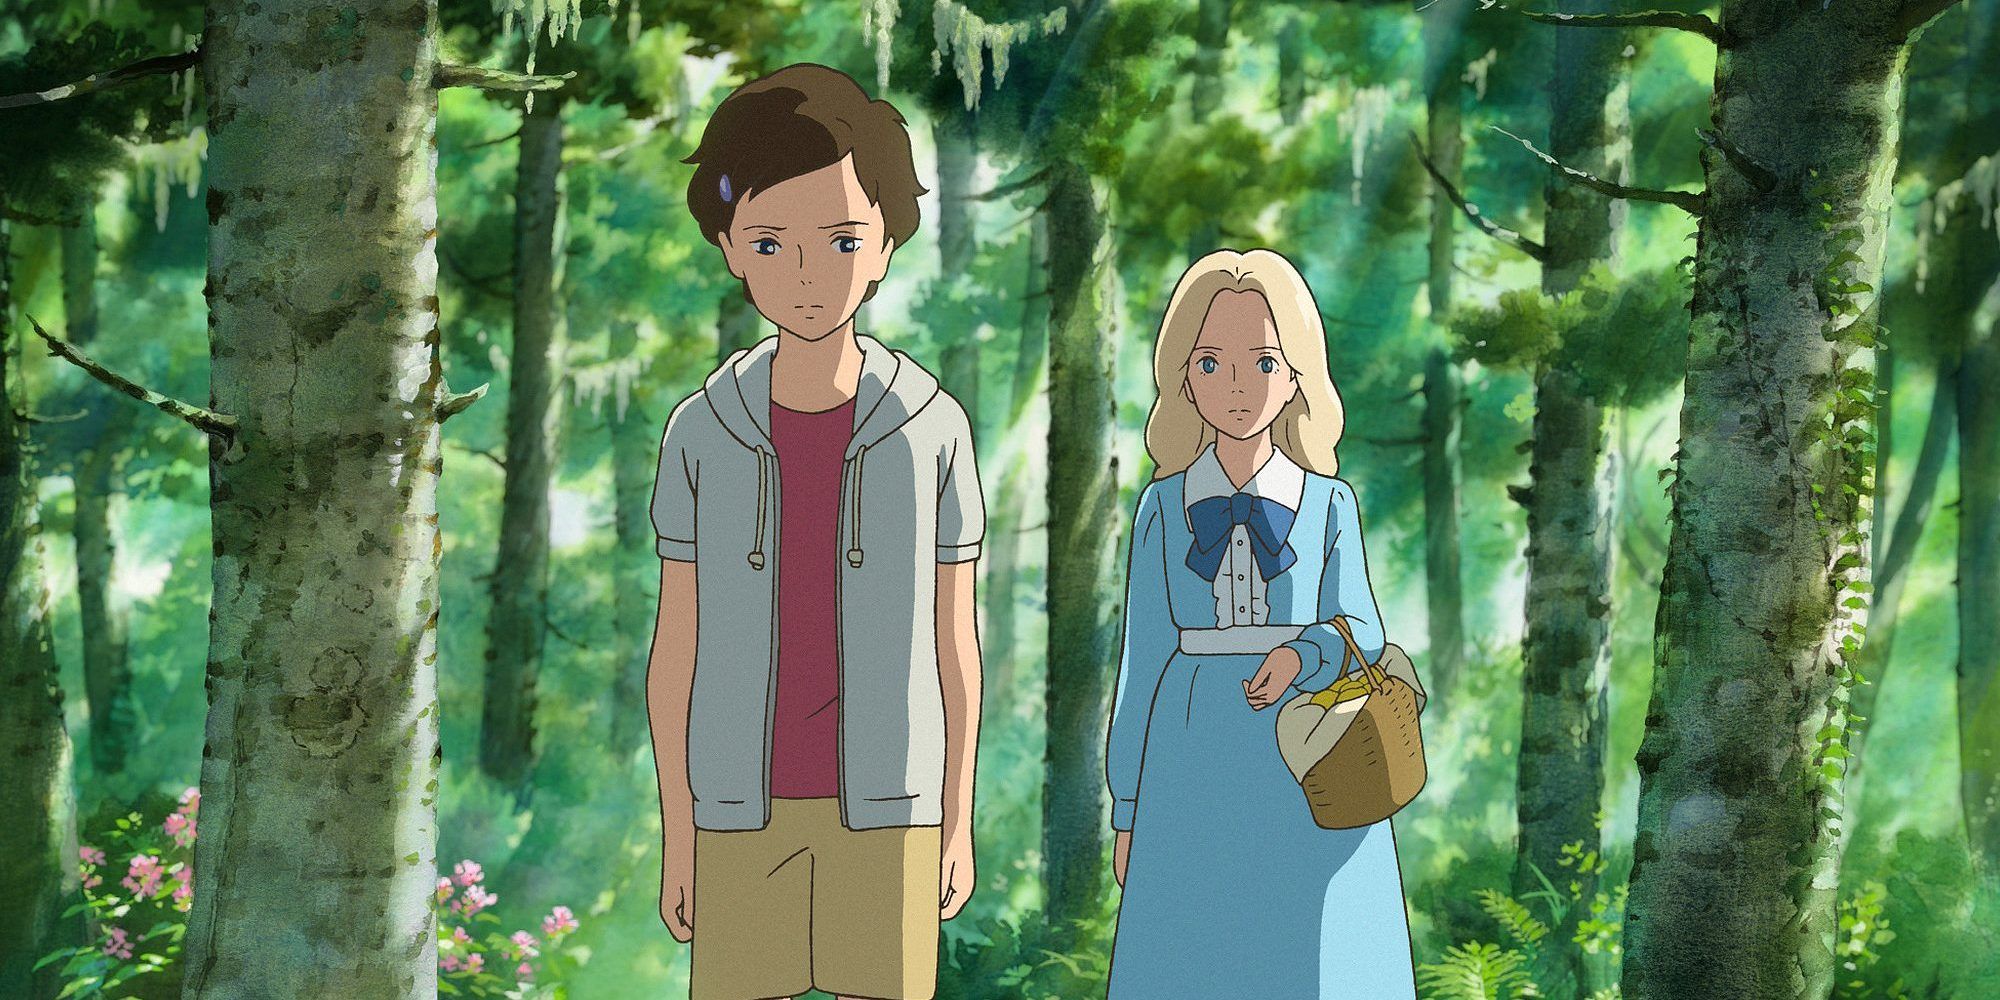 Anna and Marnie walk through the woods in When Marnie Was There